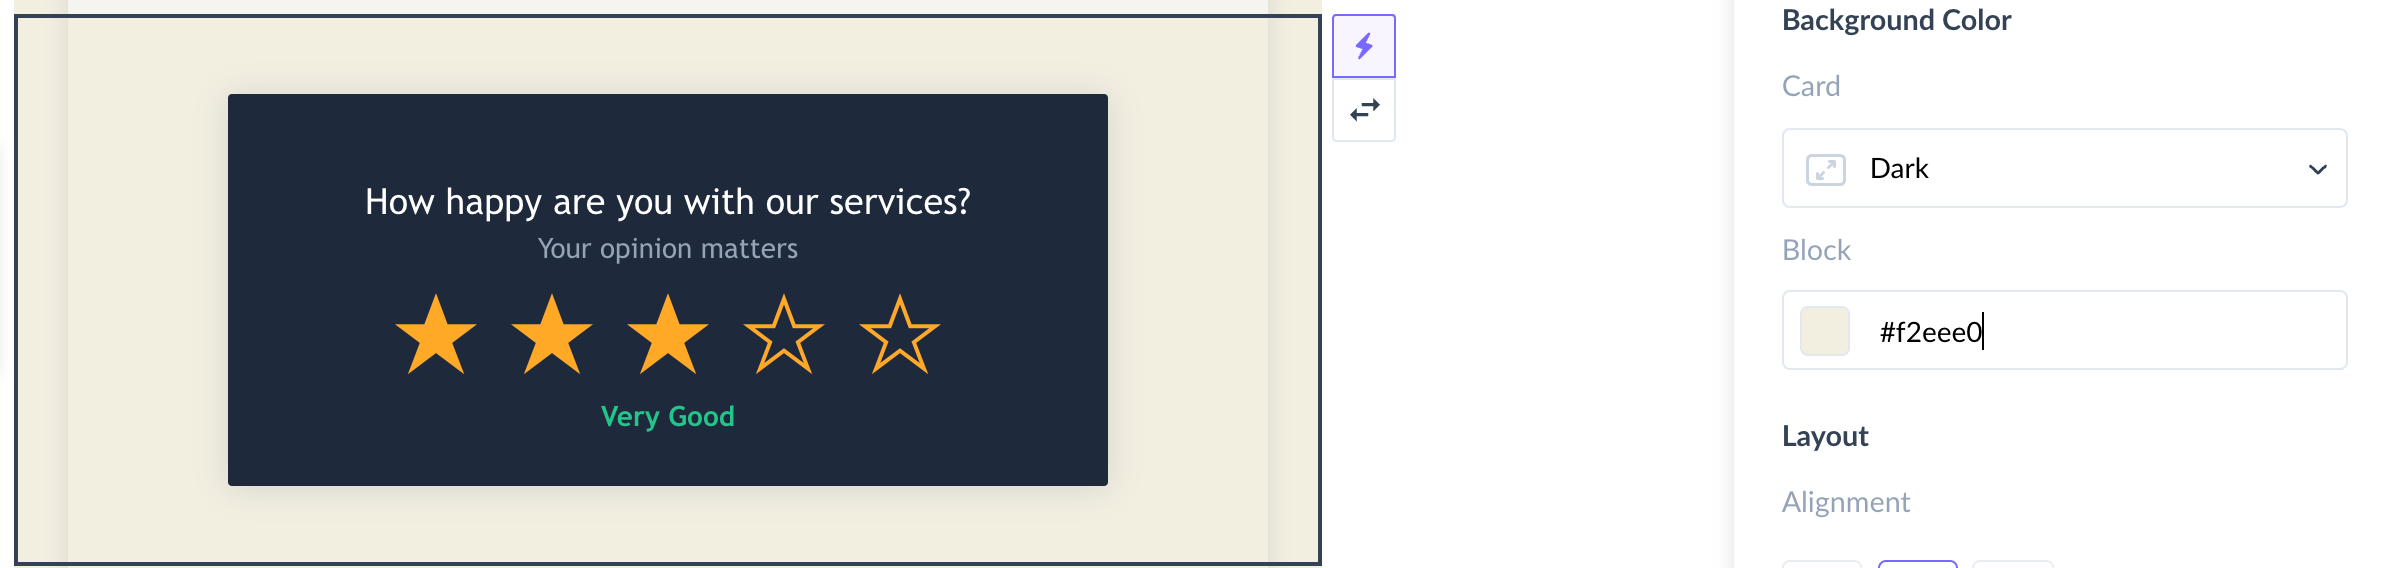 How to use Star Rating Widget in your template?